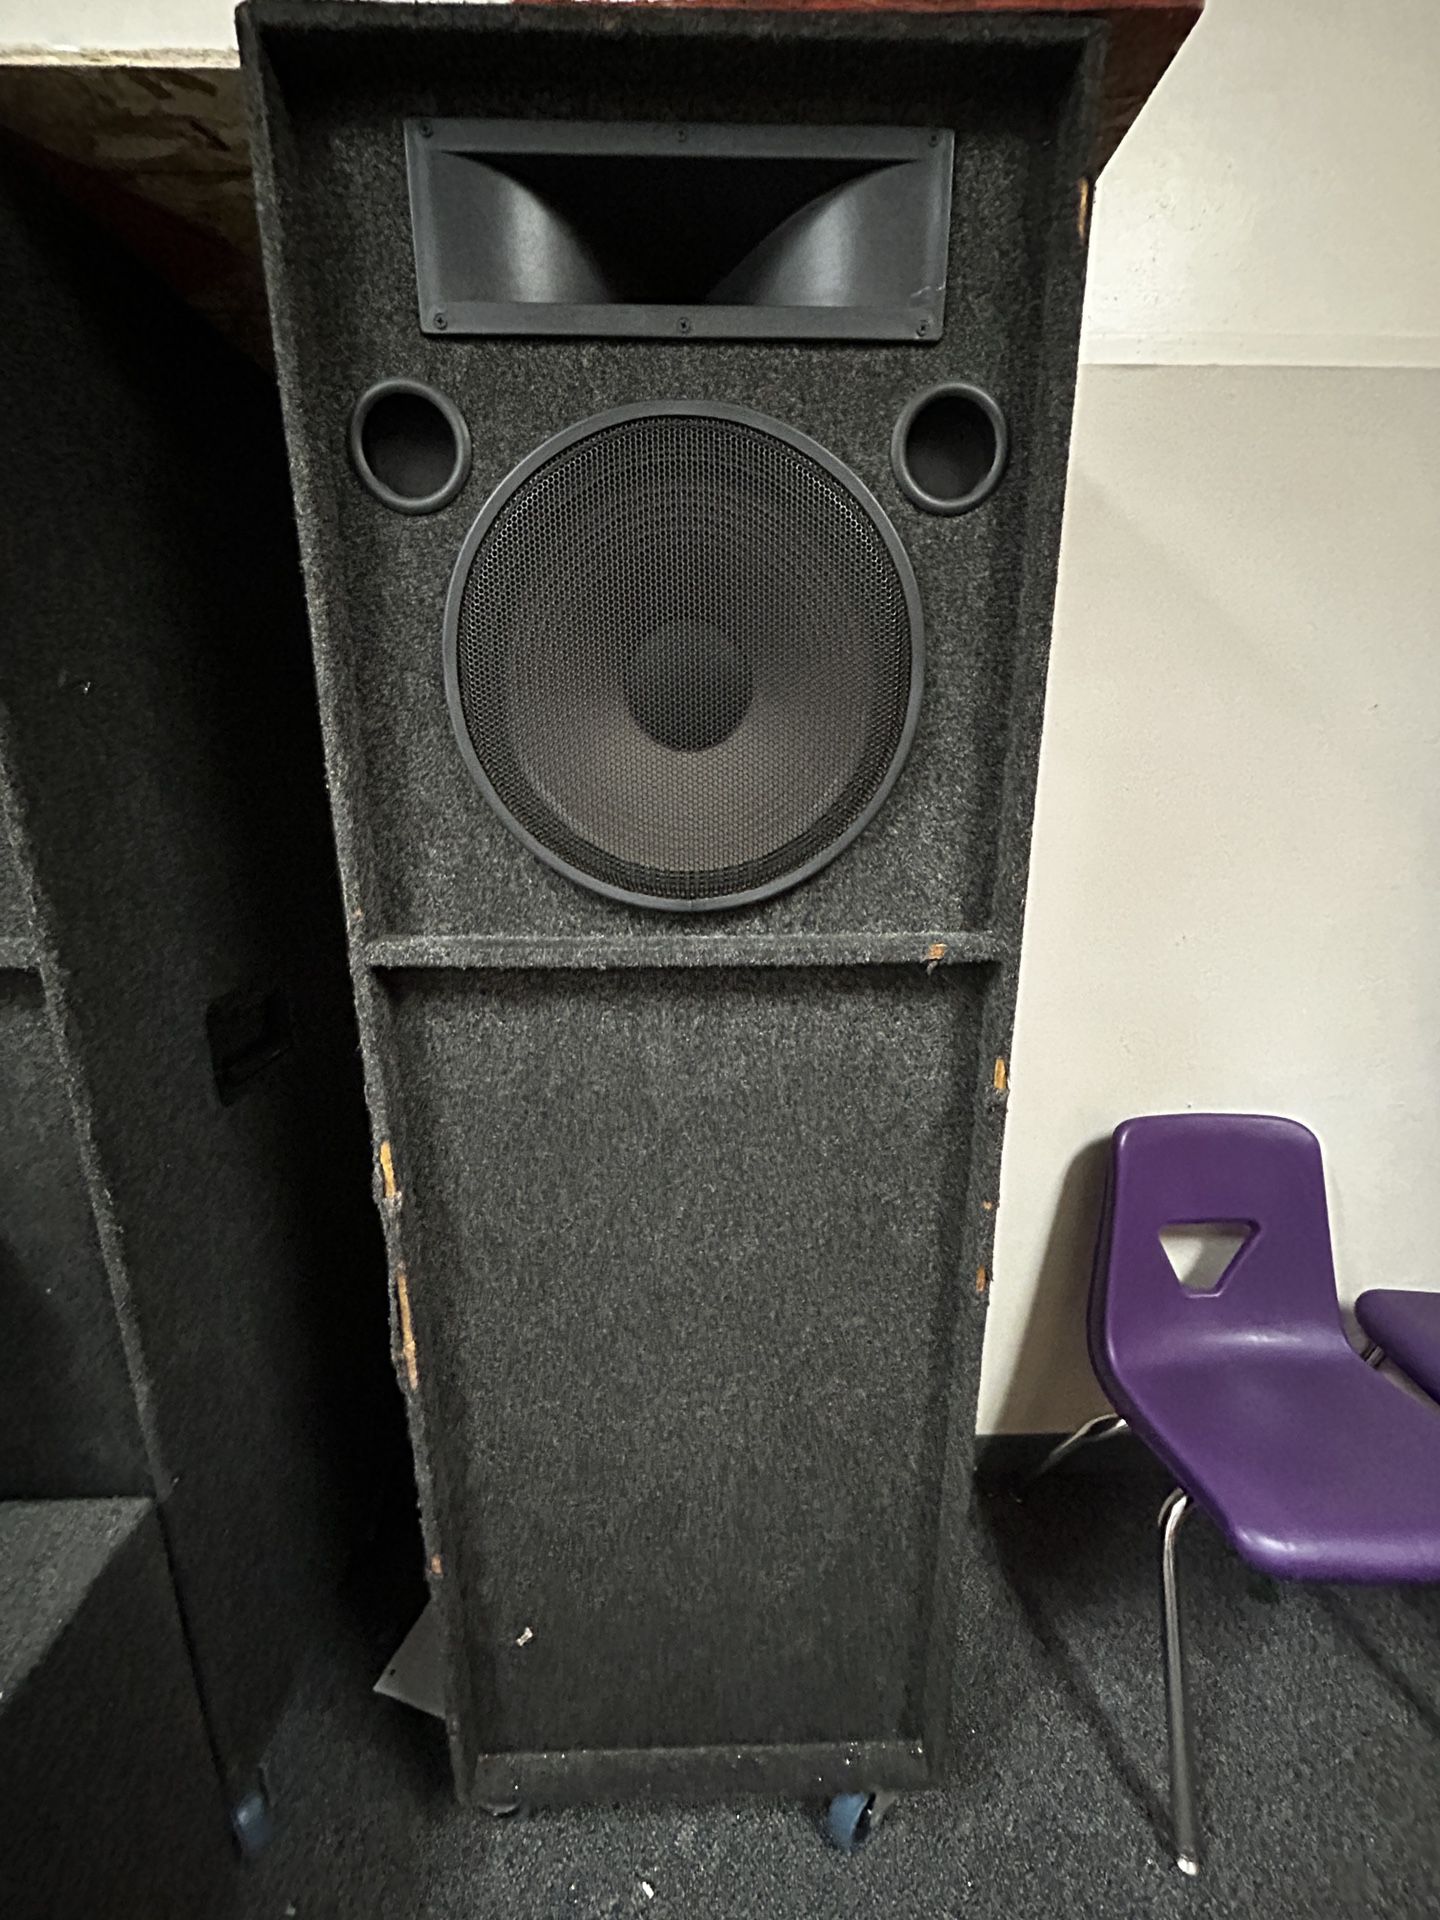 The Audio Max Total PA system 